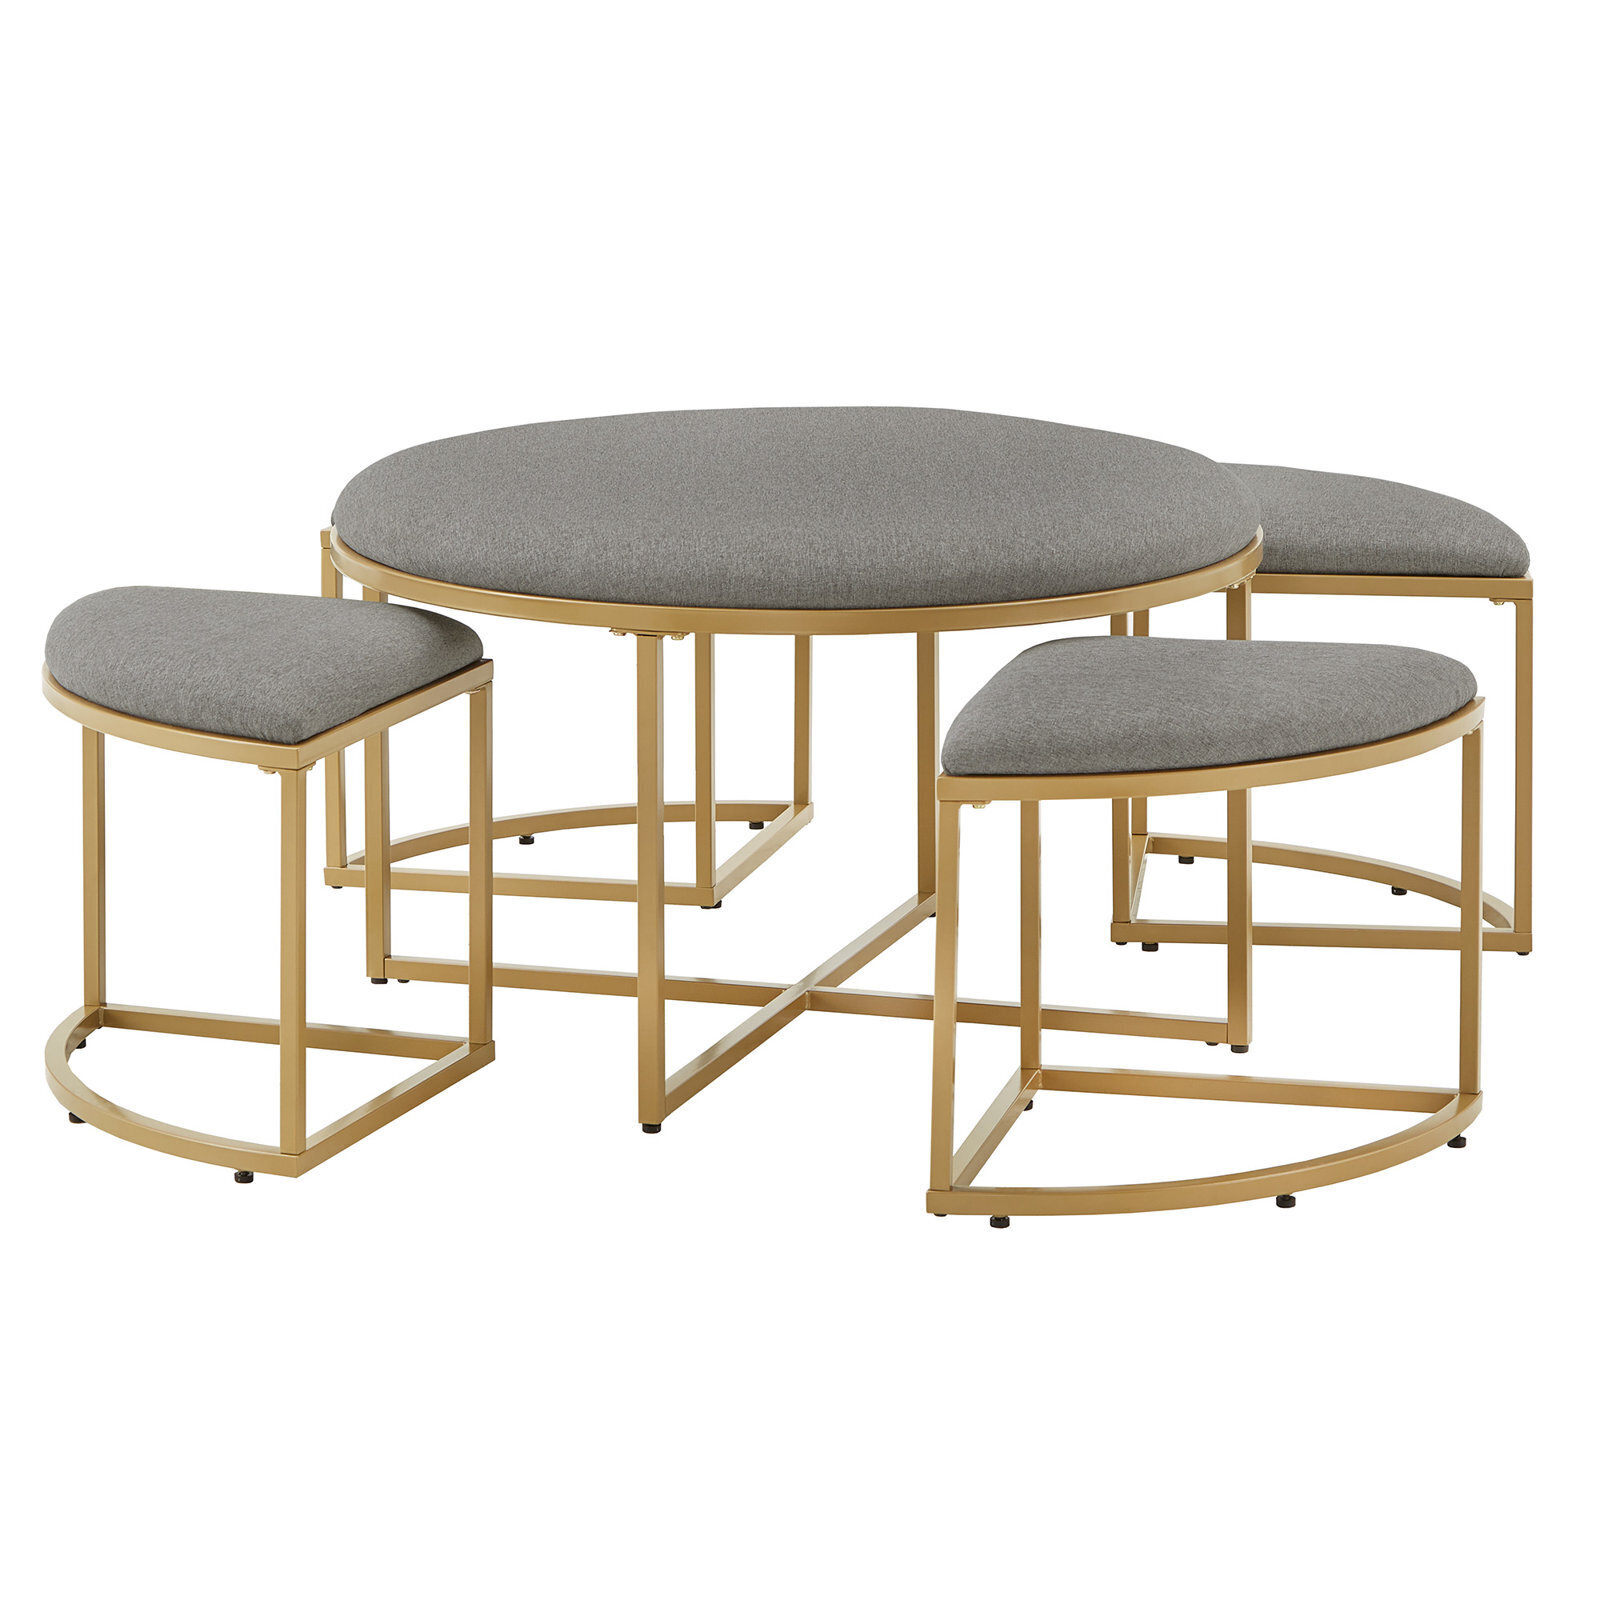 Contemporary Round Coffee Table With Stools